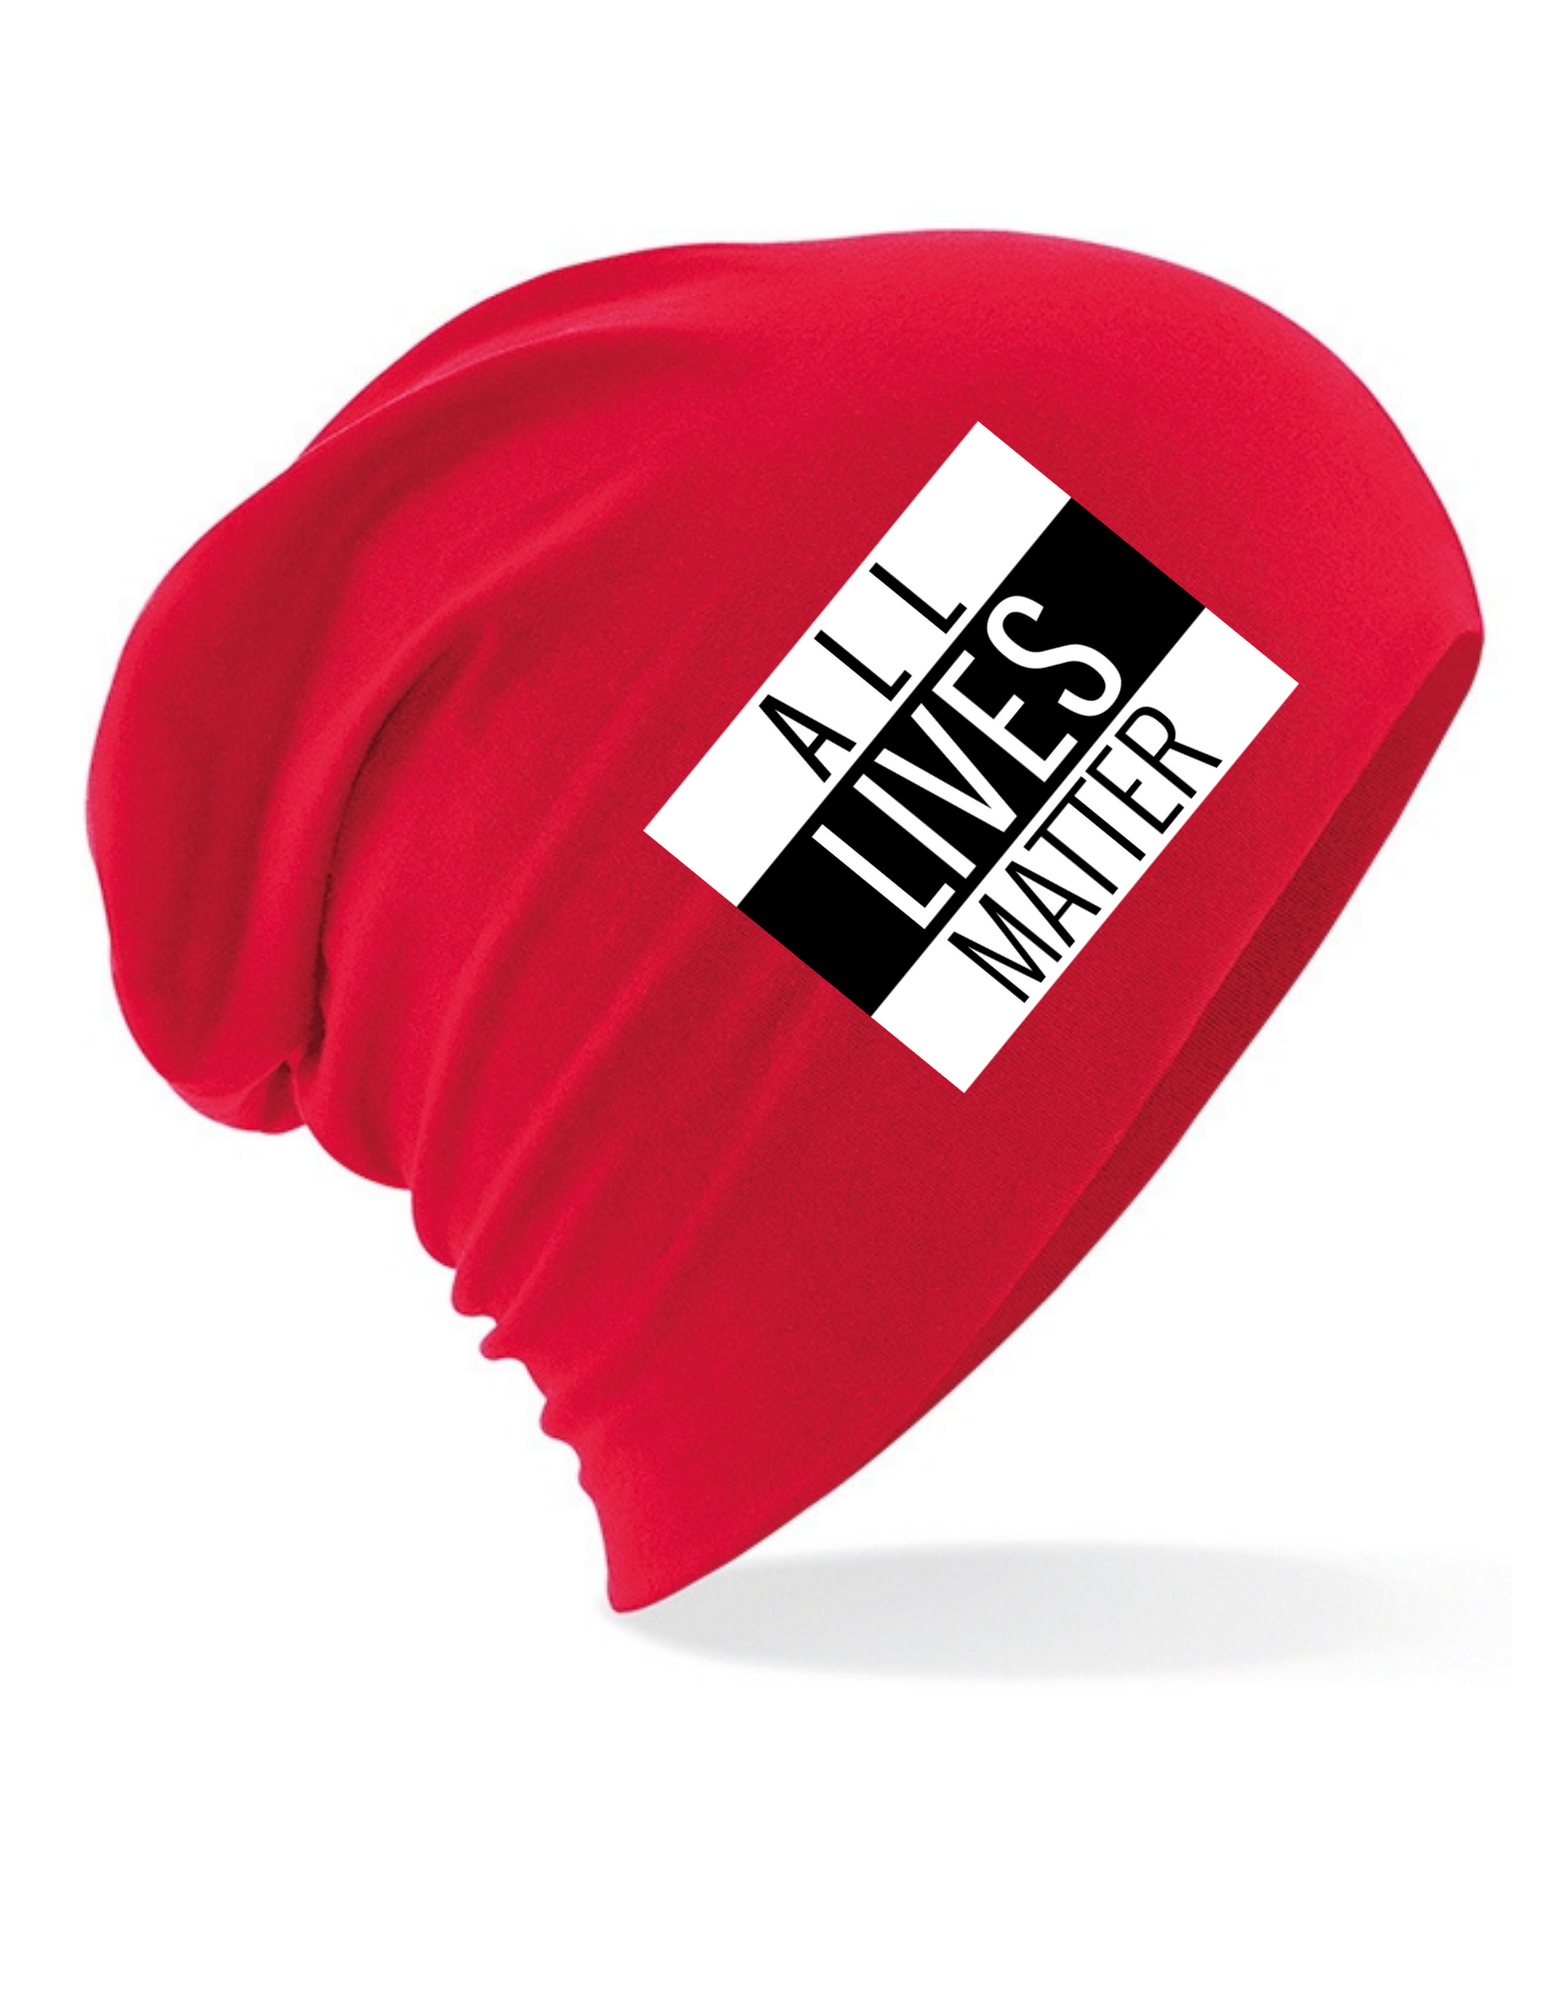 All Live Matter Beanie One Size